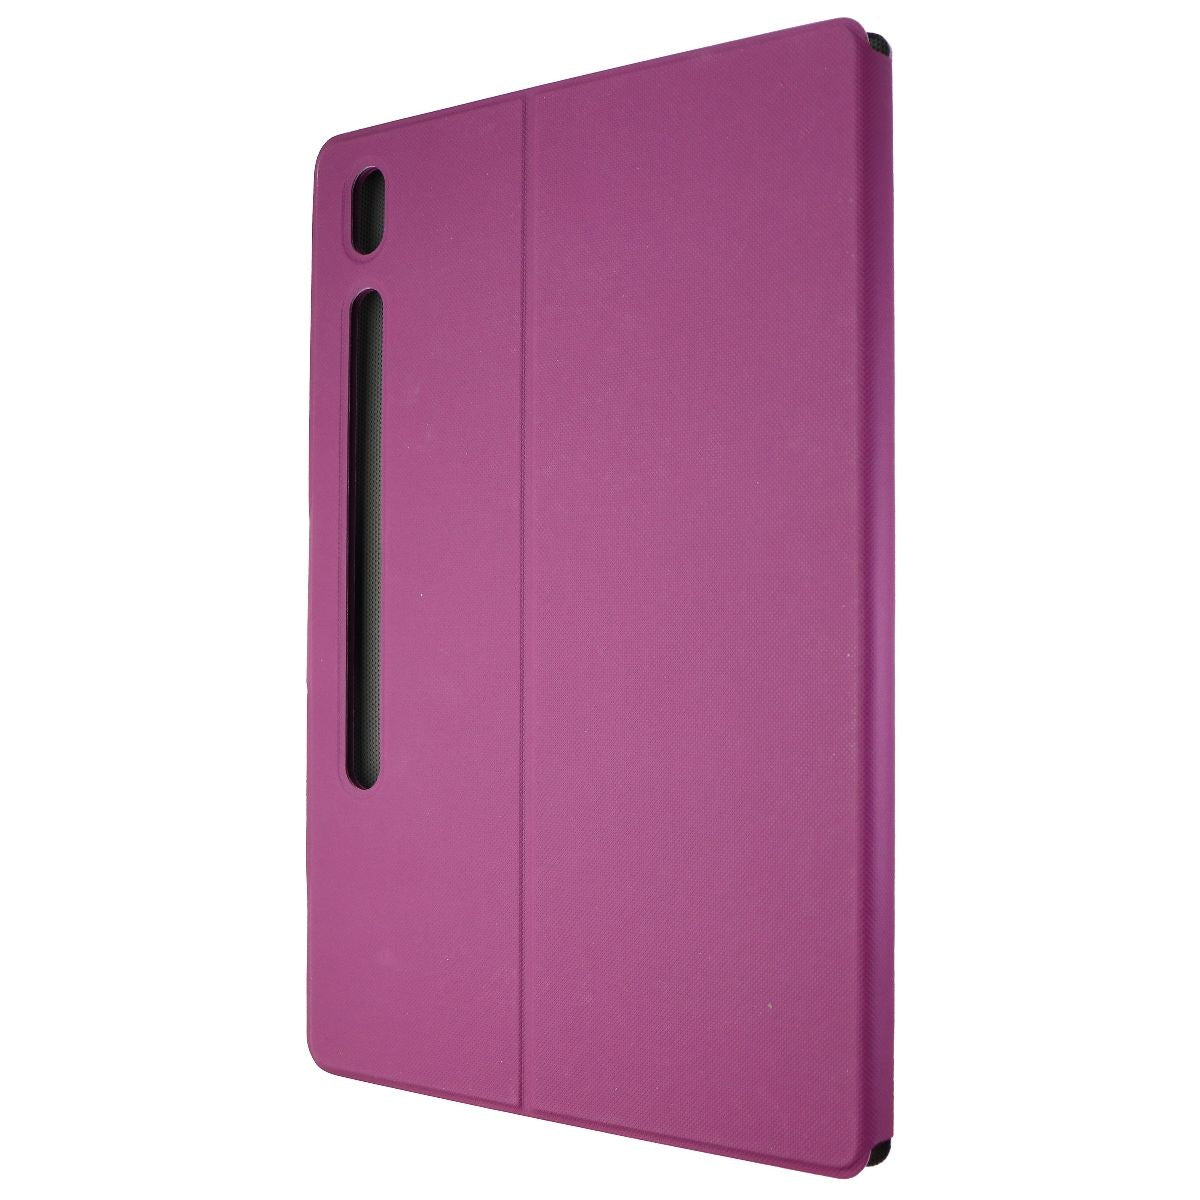 Incipio SureView Folio Case for Samsung Galaxy Tab S7 FE & Tab S7 FE 5G - Plum iPad/Tablet Accessories - Cases, Covers, Keyboard Folios Incipio    - Simple Cell Bulk Wholesale Pricing - USA Seller